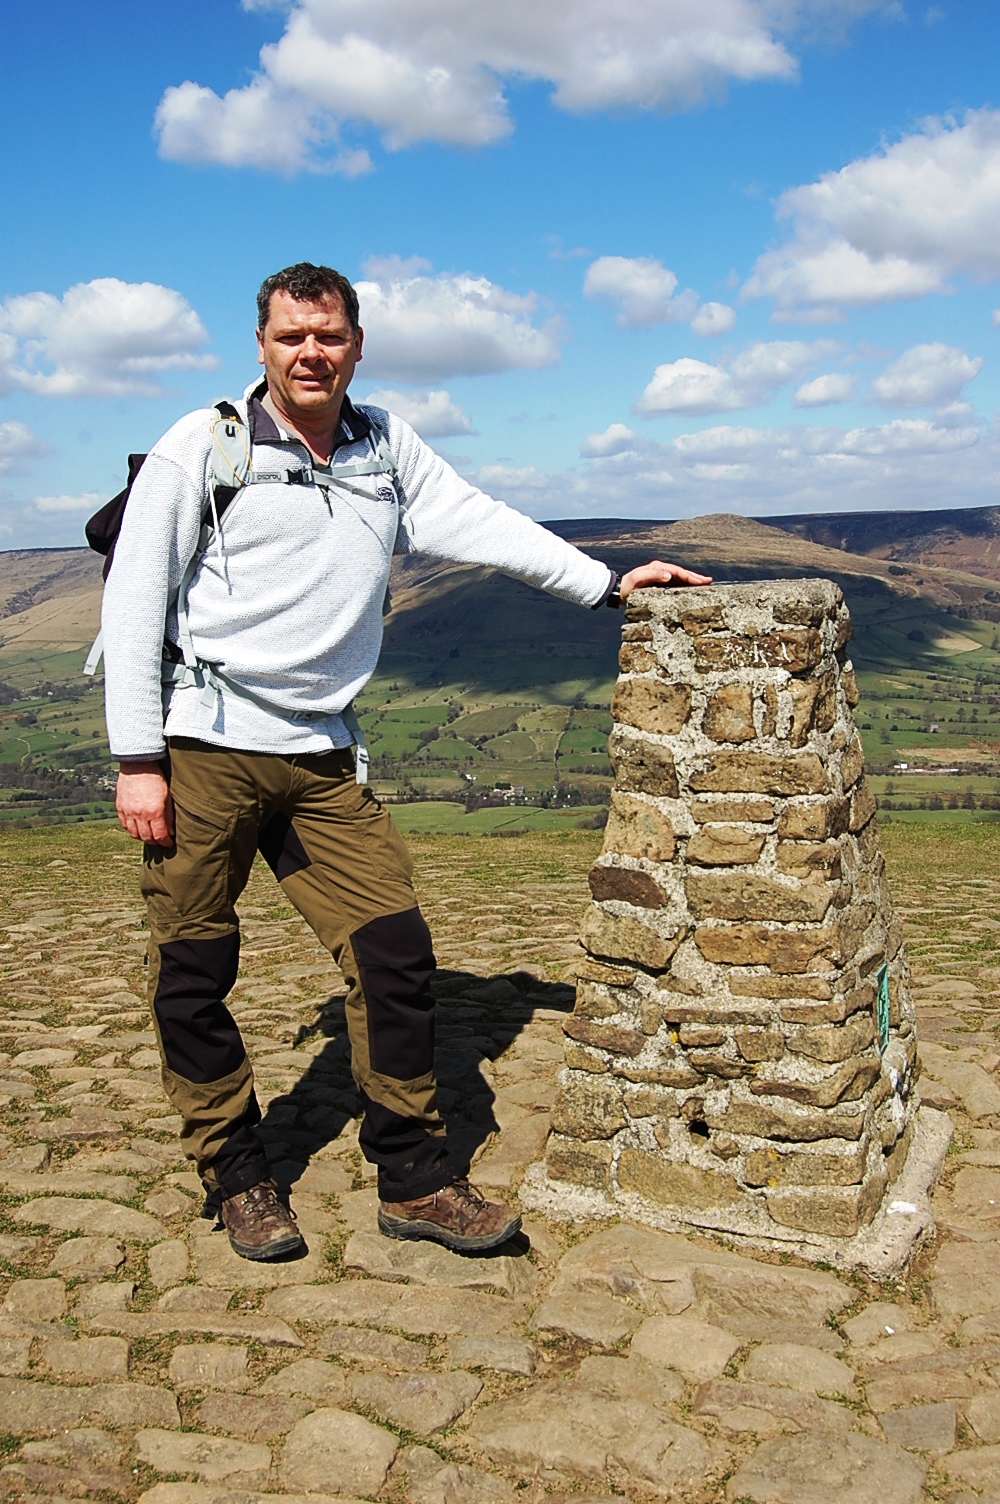 Adrian's walk is a 53 mile hike from the White Peaks to the Dark Peaks